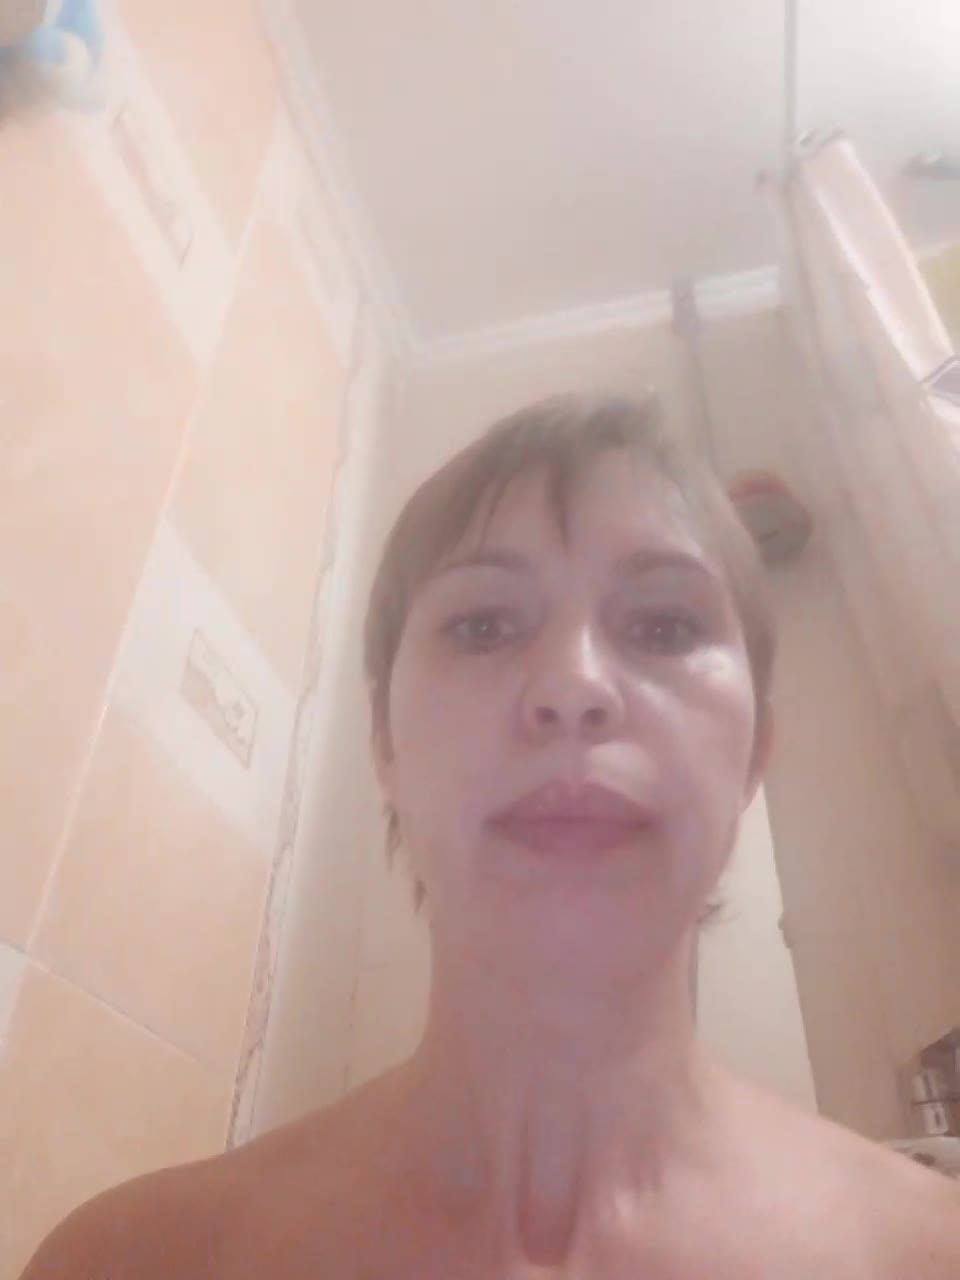 View or download file oksl1978 on 2023-02-19 from bongacams